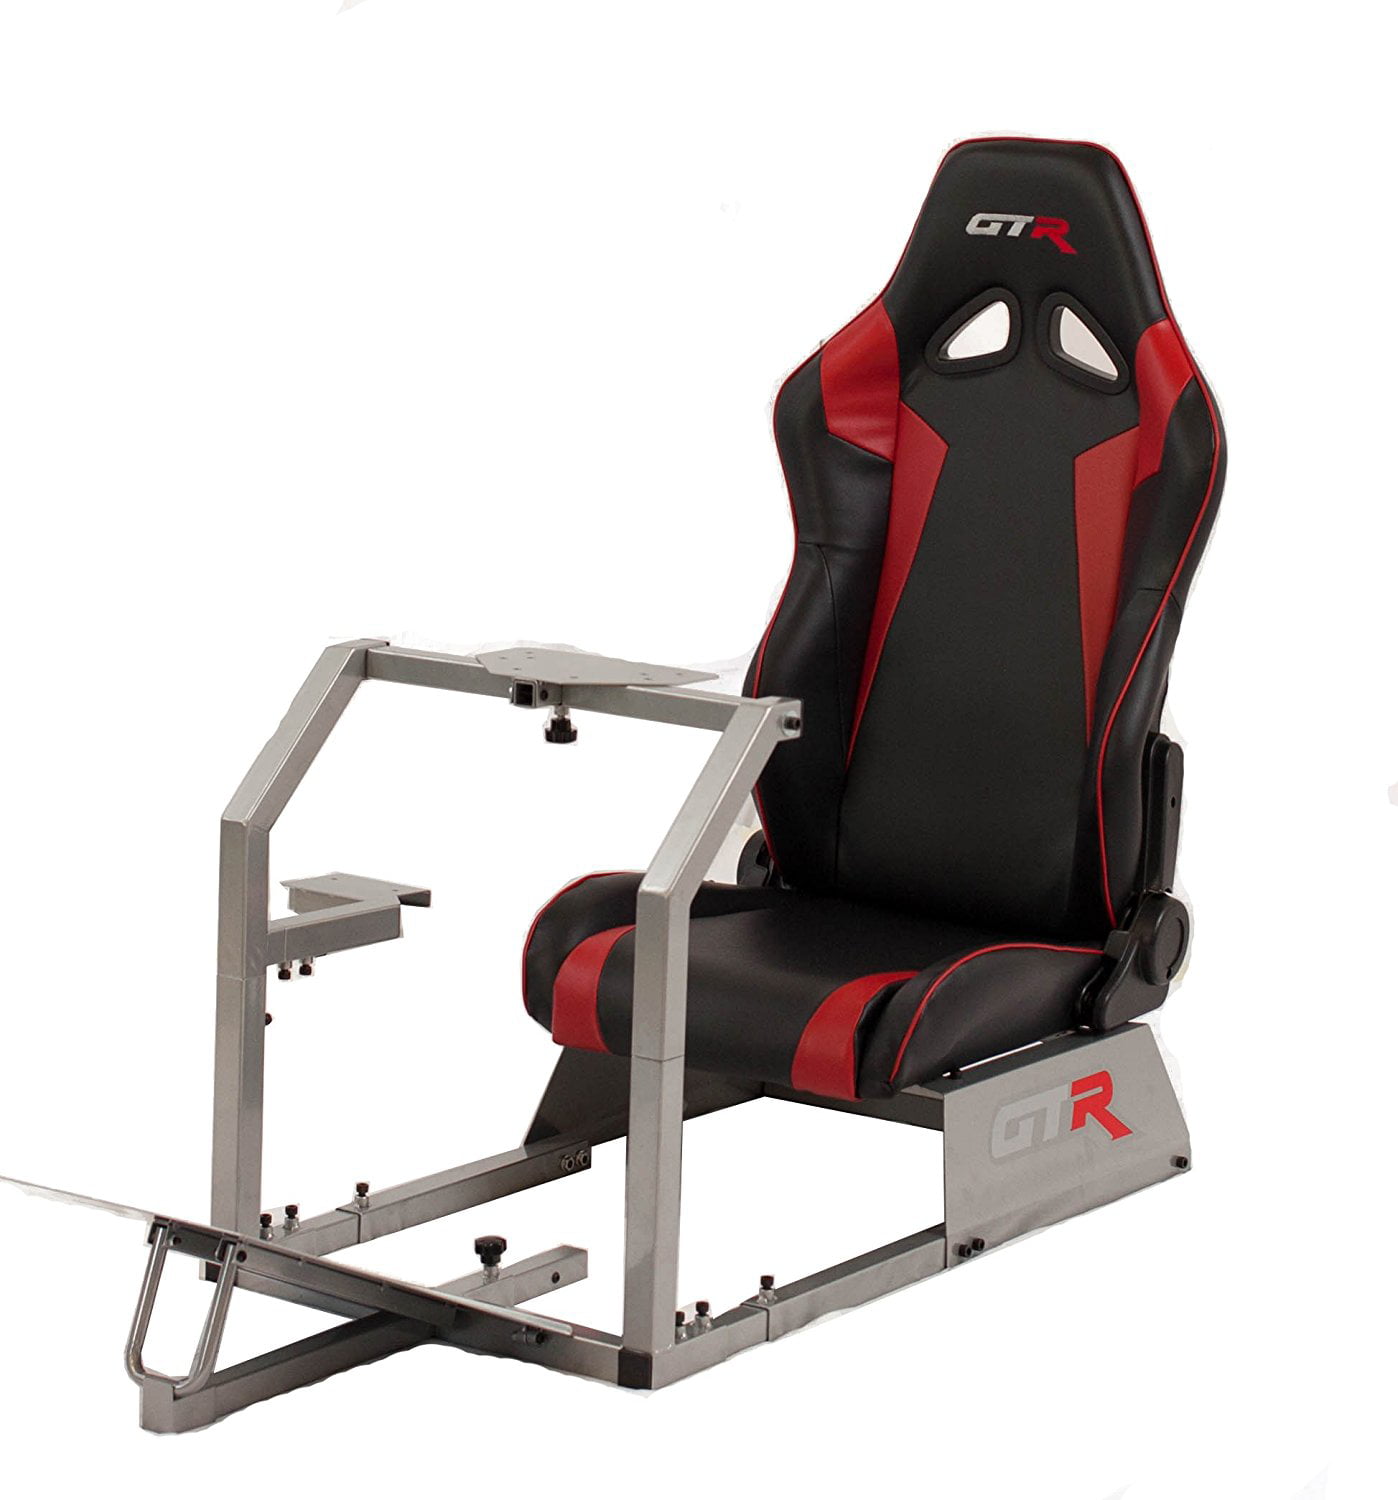 Simple Gtr Racing Chair Review for Simple Design